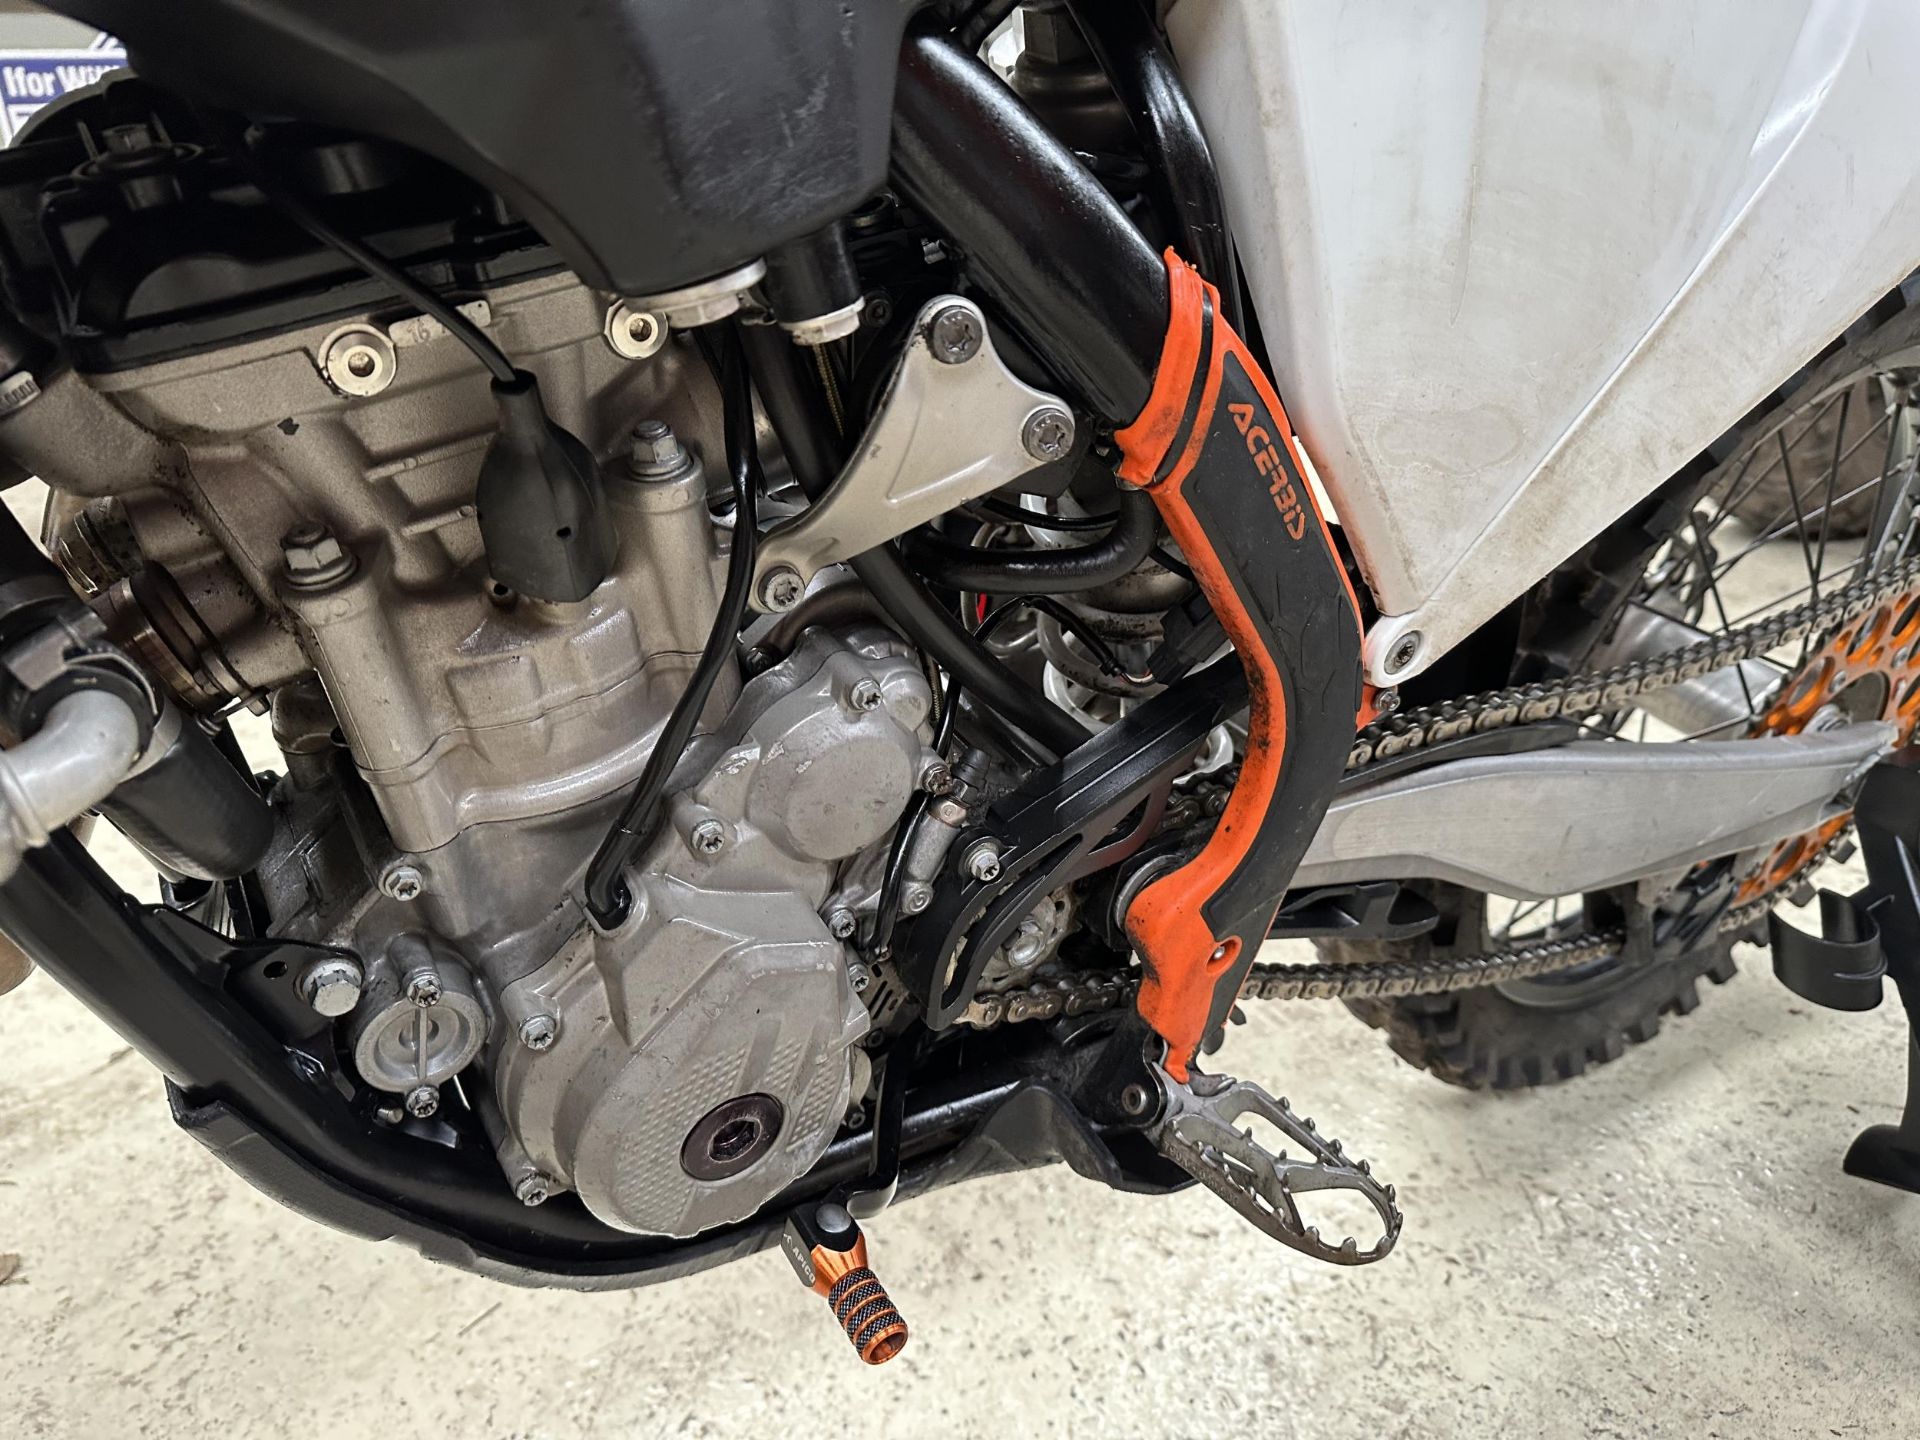 2019 KTM 250 SXF MOTORBIKE 158 HOURS PISTON & CAM CHAIN DONE 40 HOURS AGO. MAP SWITCH BUTTON, - Image 4 of 9